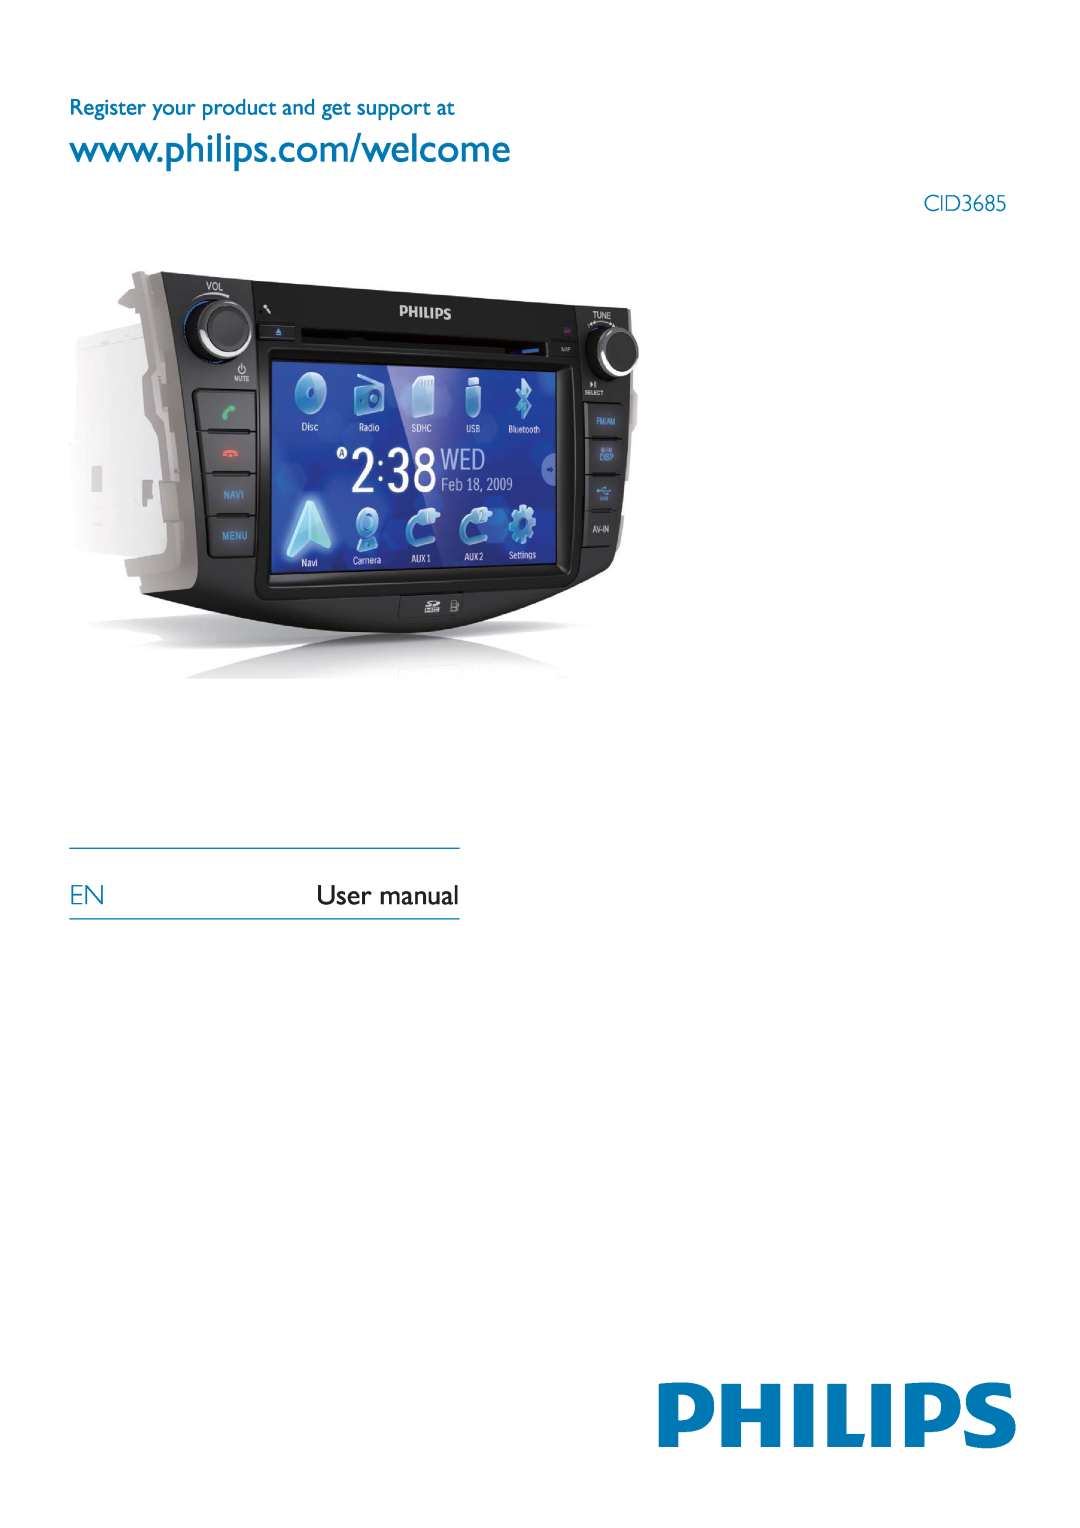 Philips user manual Register your product and get support at CID3685 